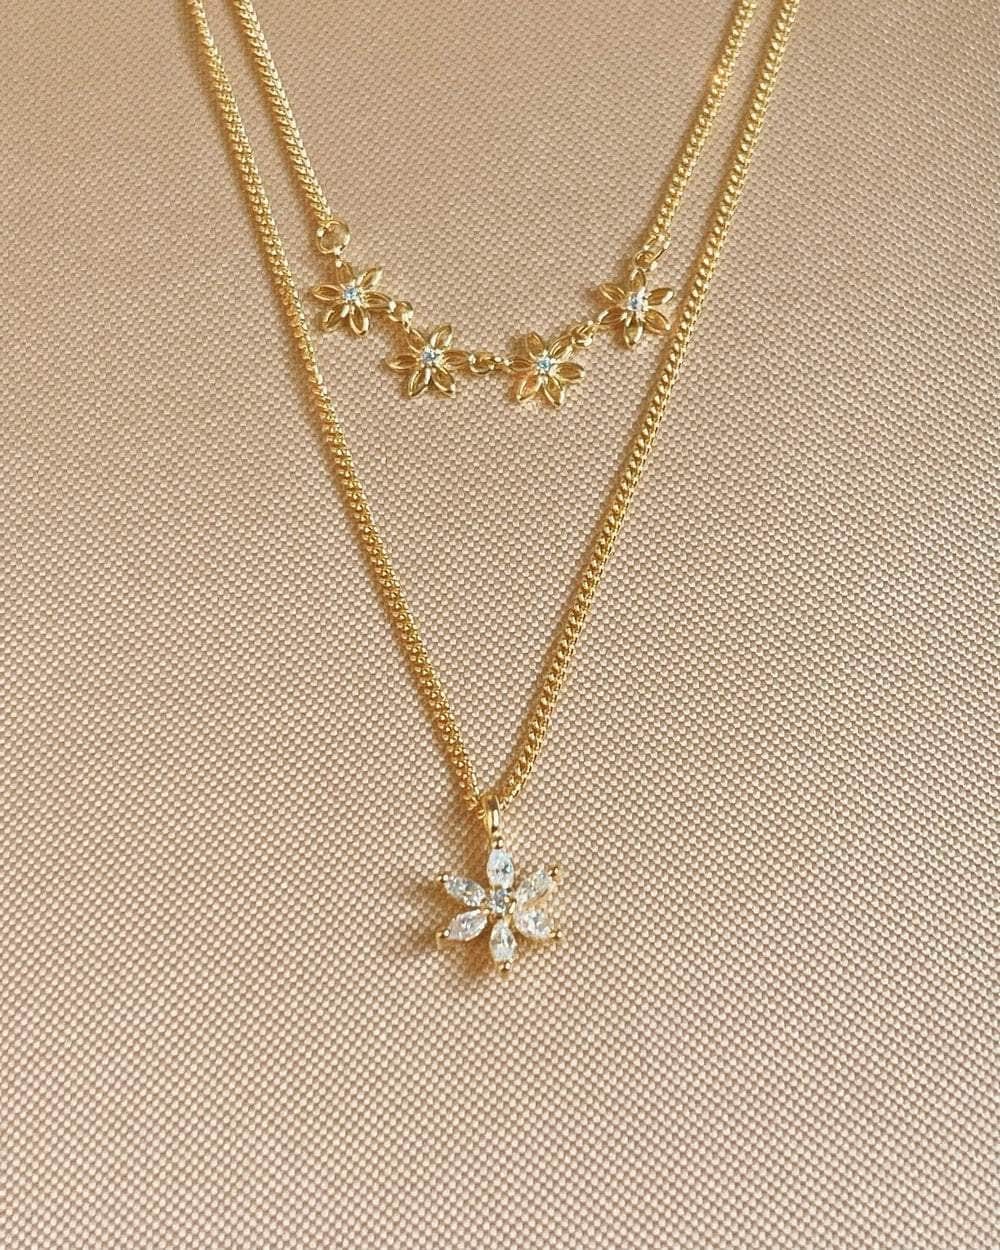 So Dainty Co. Necklaces Flora Gold Necklace Gold Plated 925 Sterling Silver Jewelry